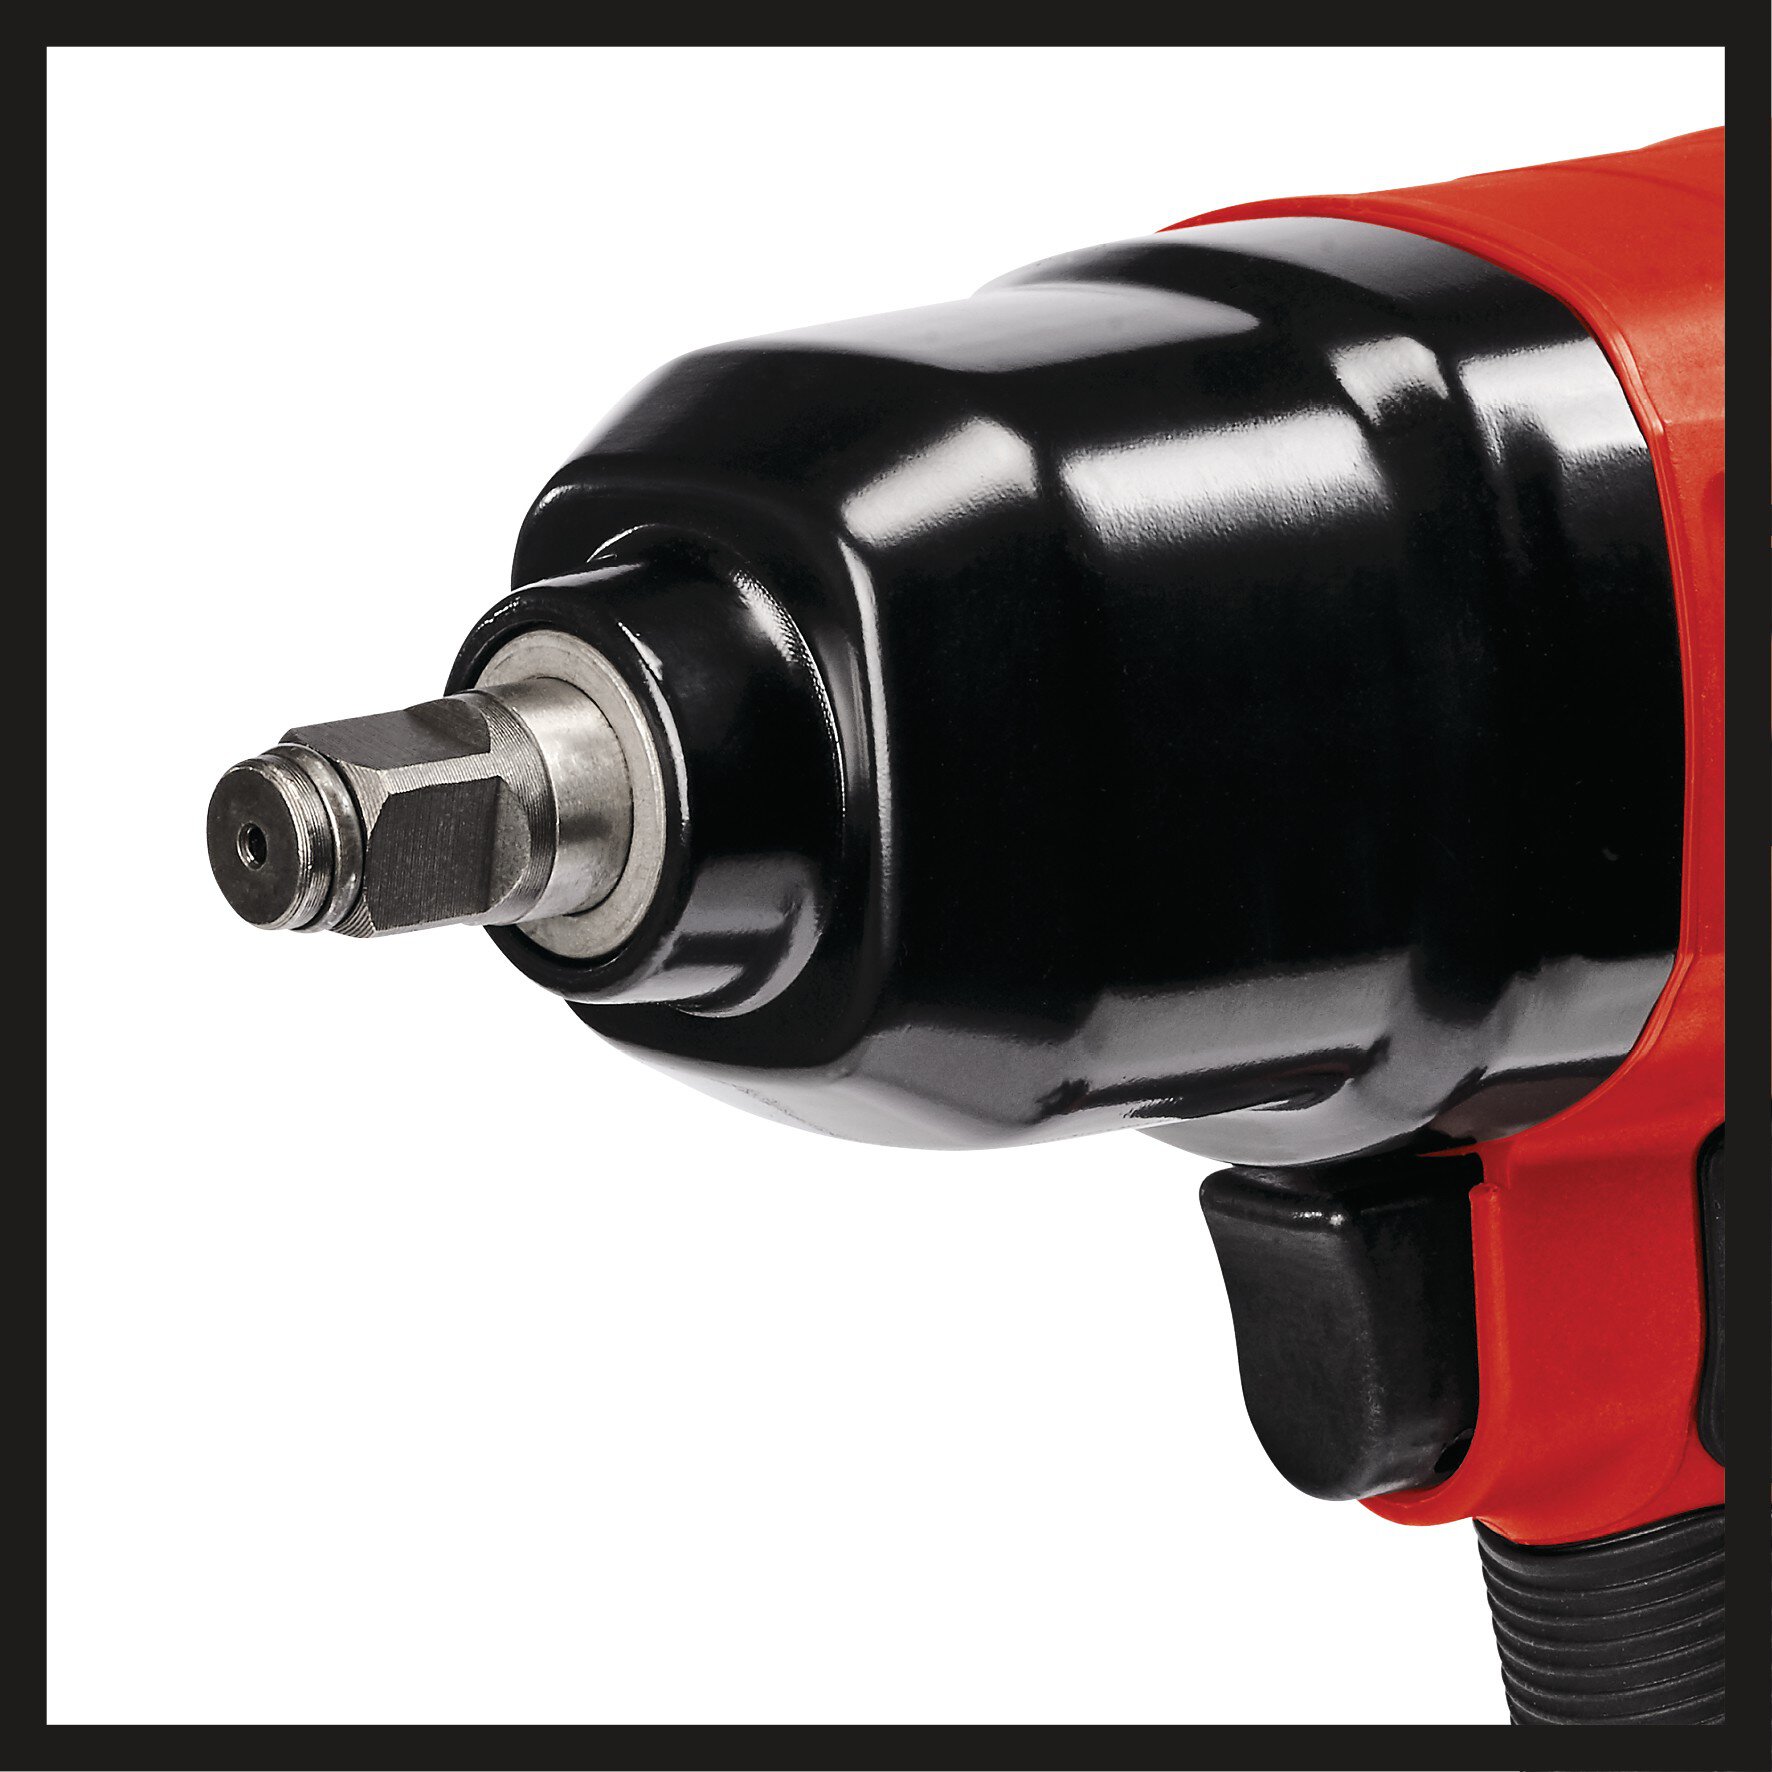 einhell-classic-impact-wrench-pneumatic-4138950-detail_image-101